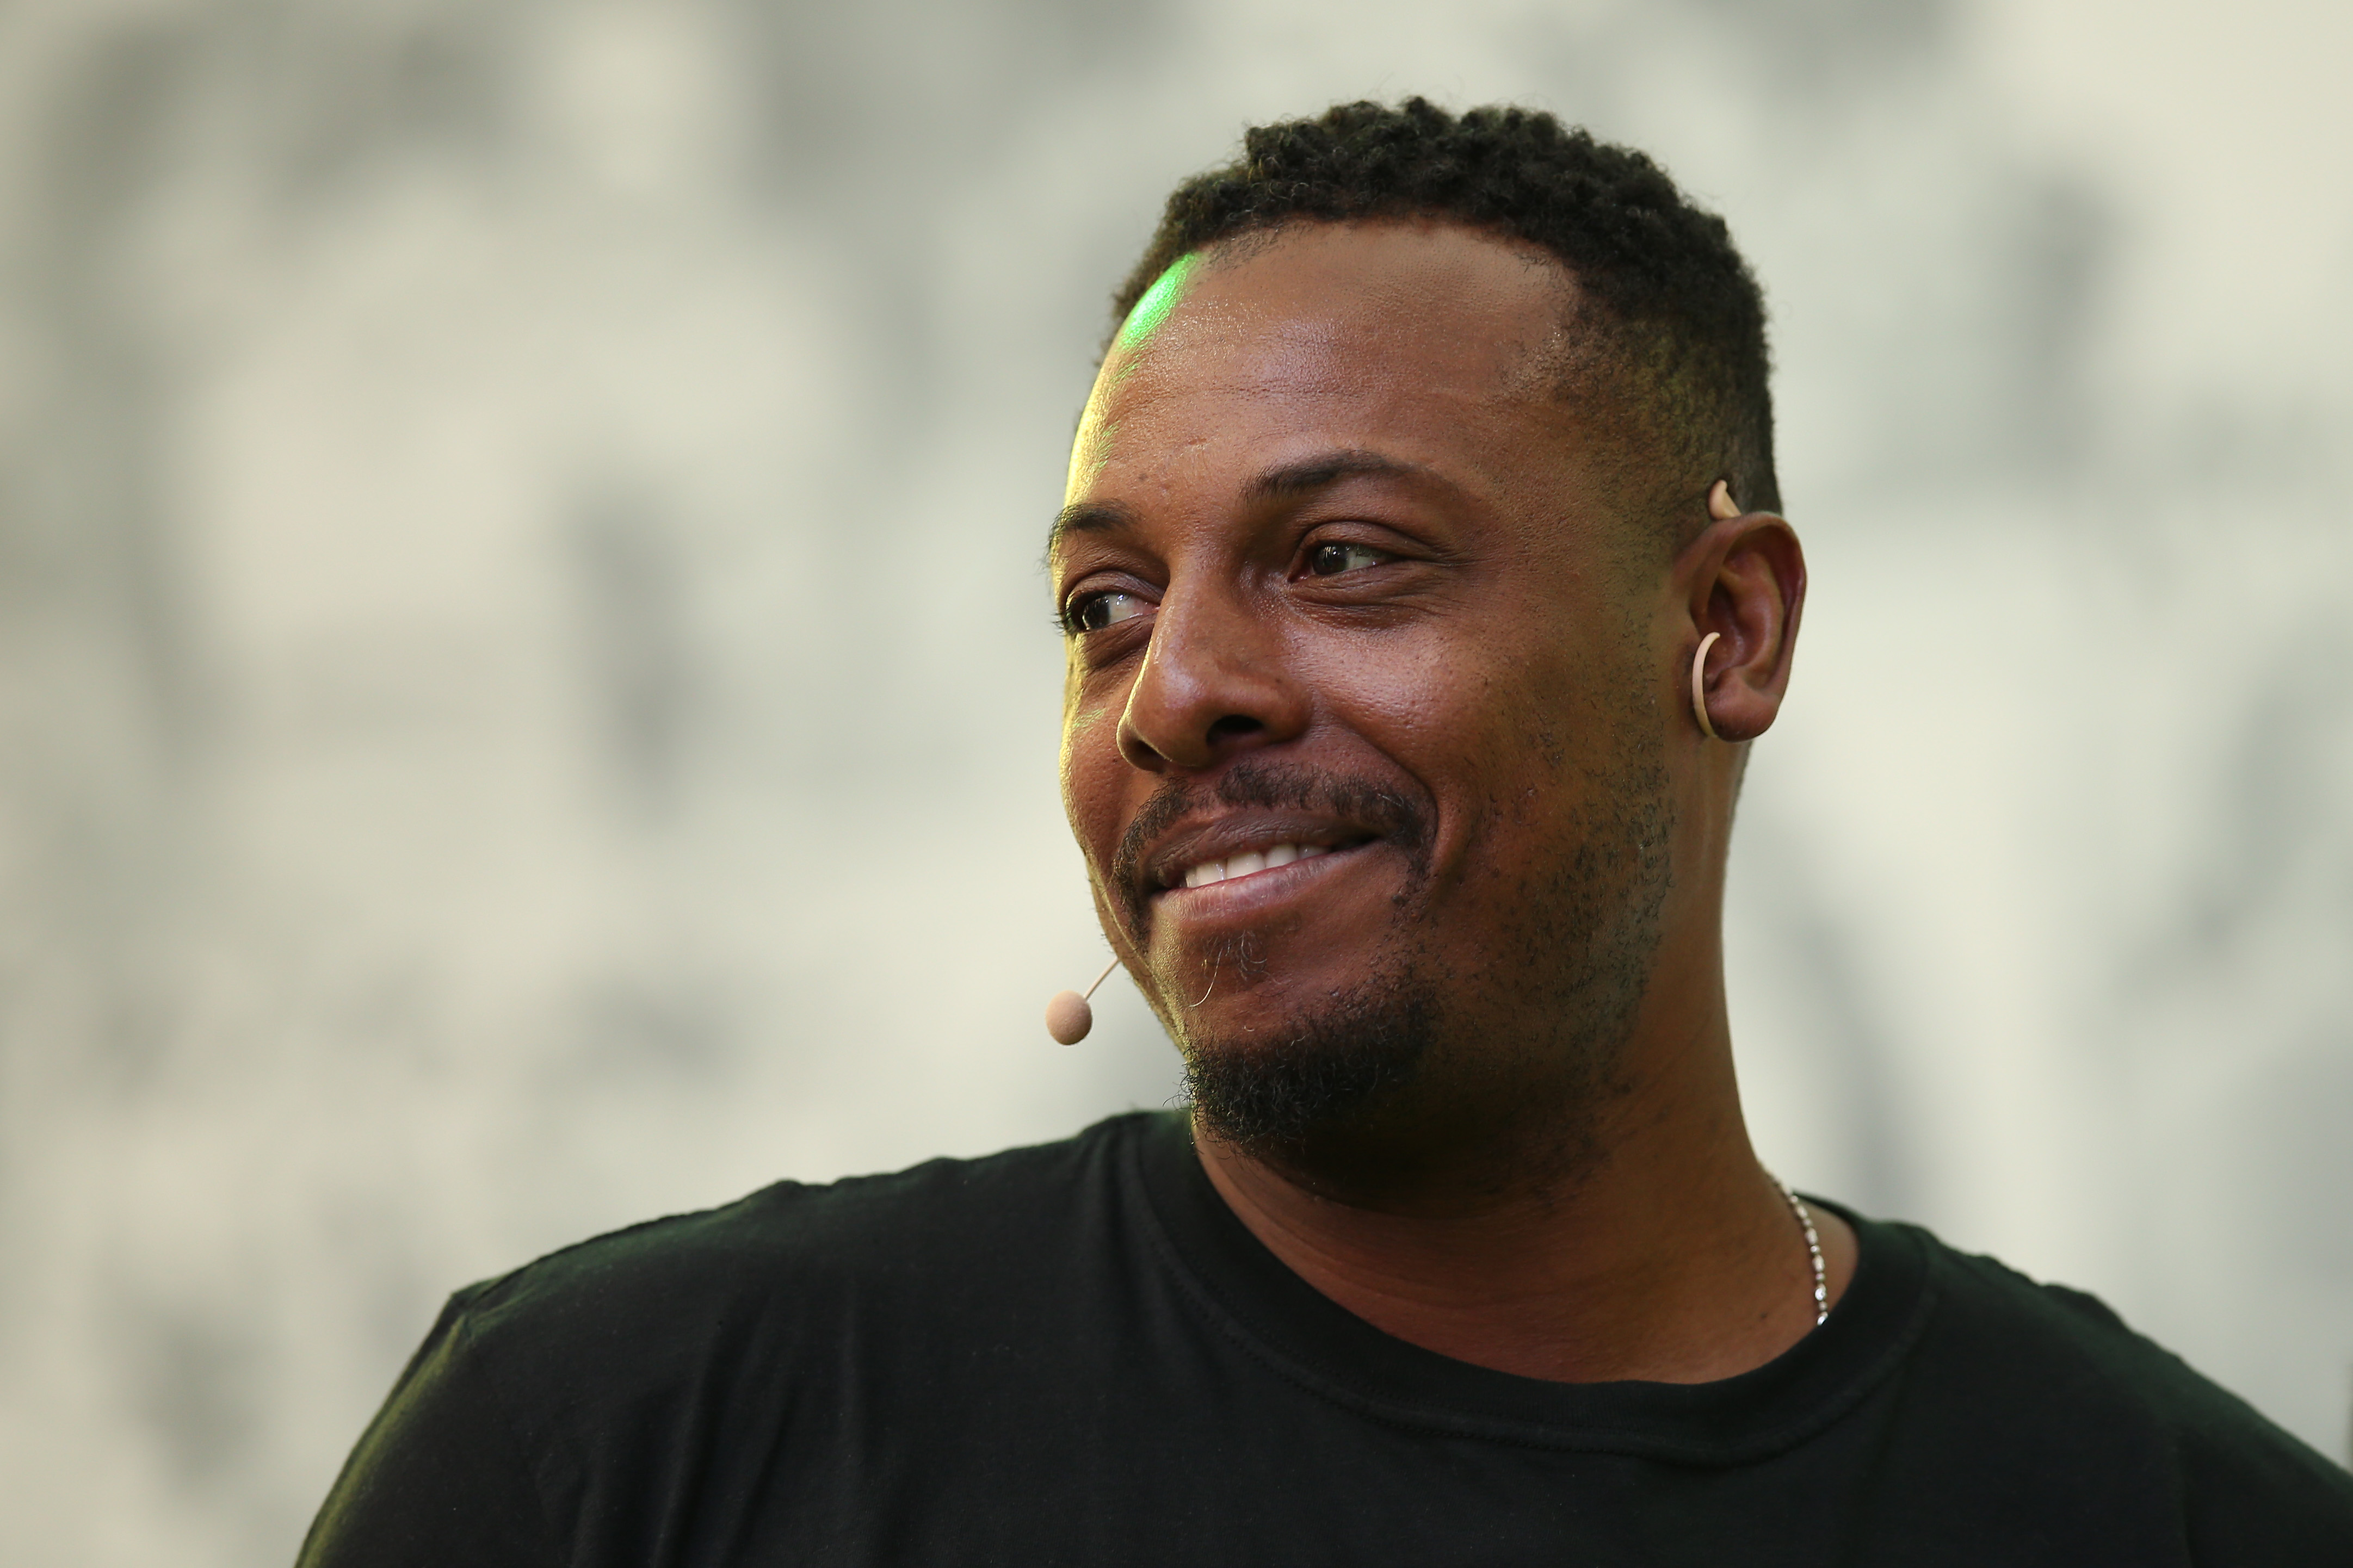 Paul Pierce of the Boston Celtics poses for a portrait during the